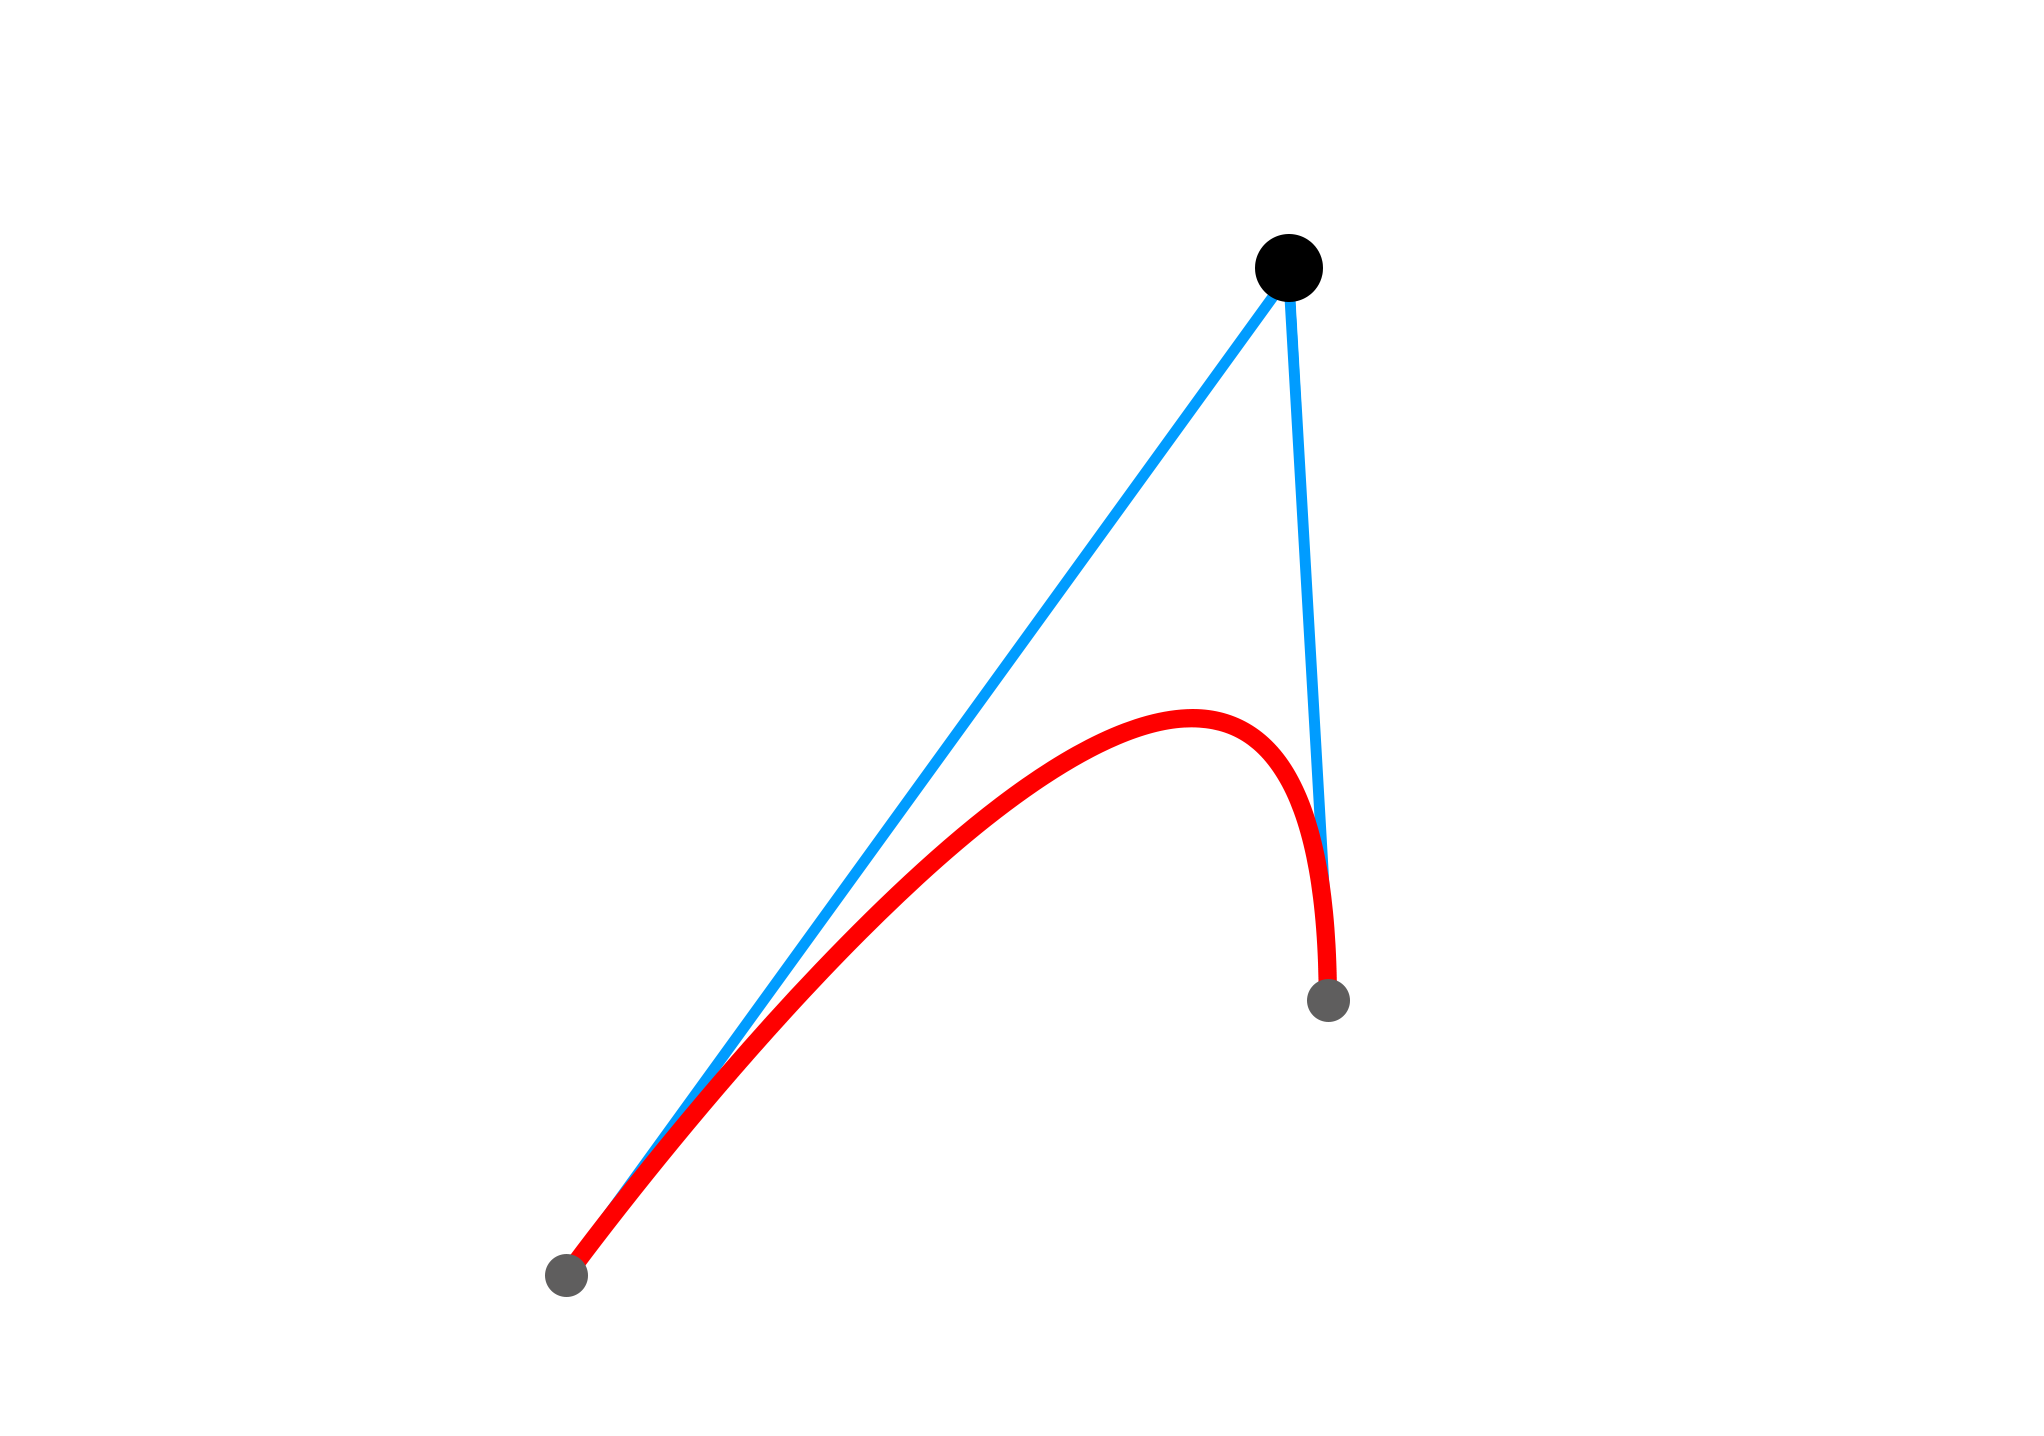 The "control point" of a Bézier curve.